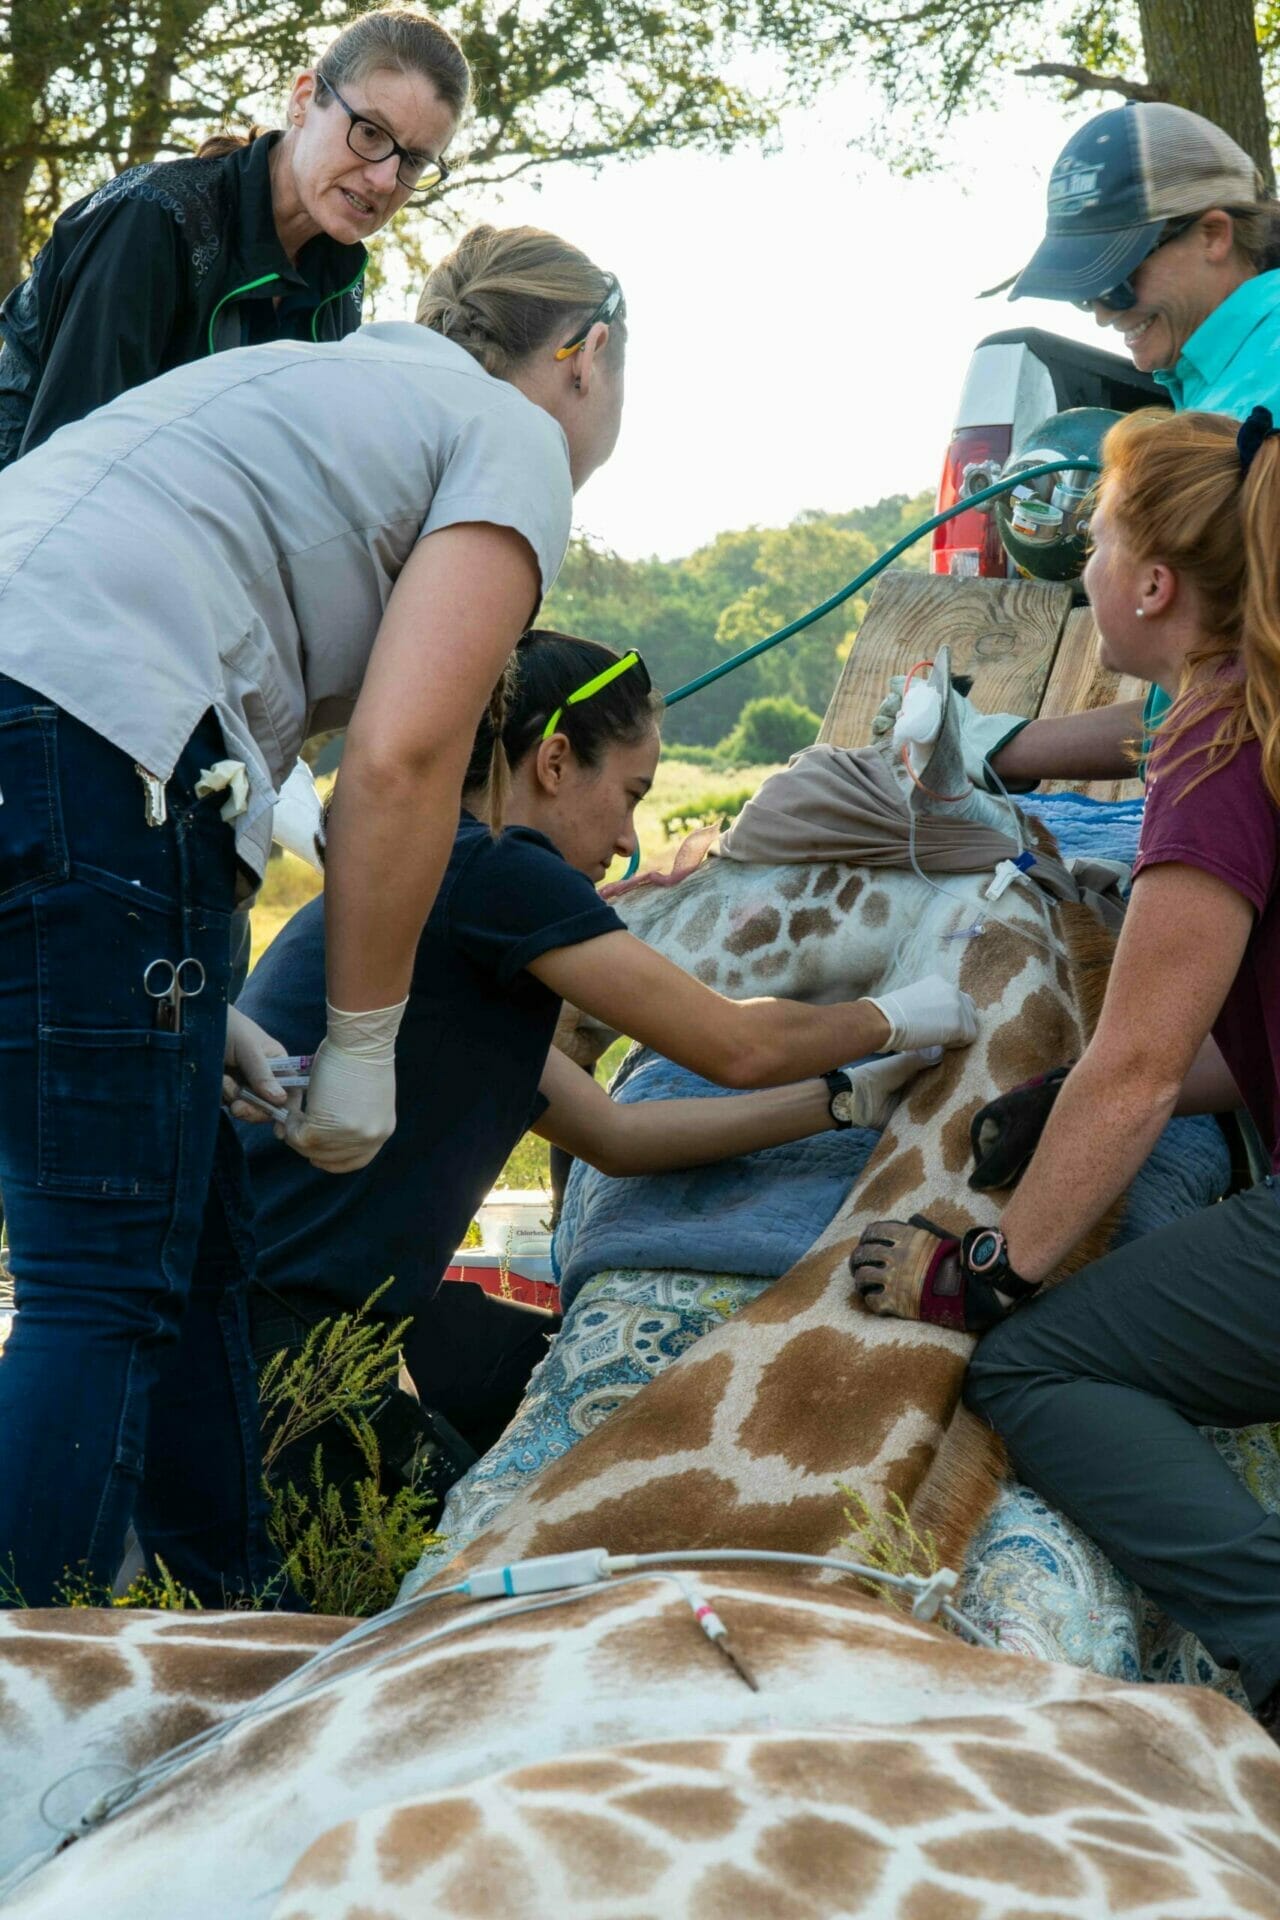 Many animal health staff working with Nyla the giraffe who is under sedation. One is drawing blood, while another massages the neck muscles to prevent dangerous muscles cramps.